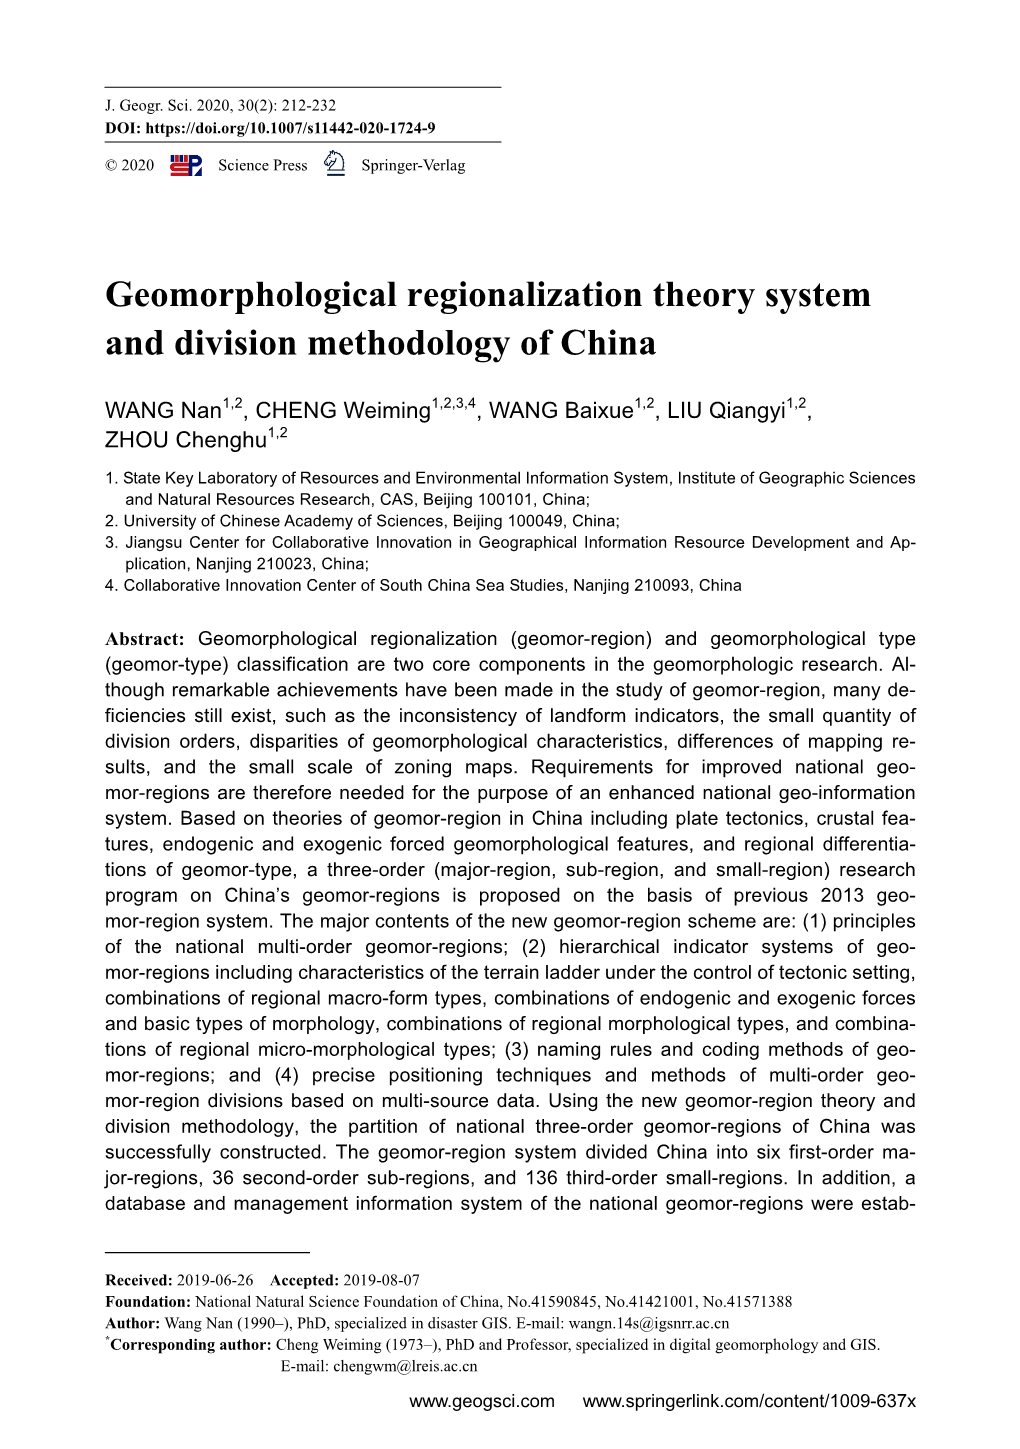 Geomorphological Regionalization Theory System and Division Methodology of China